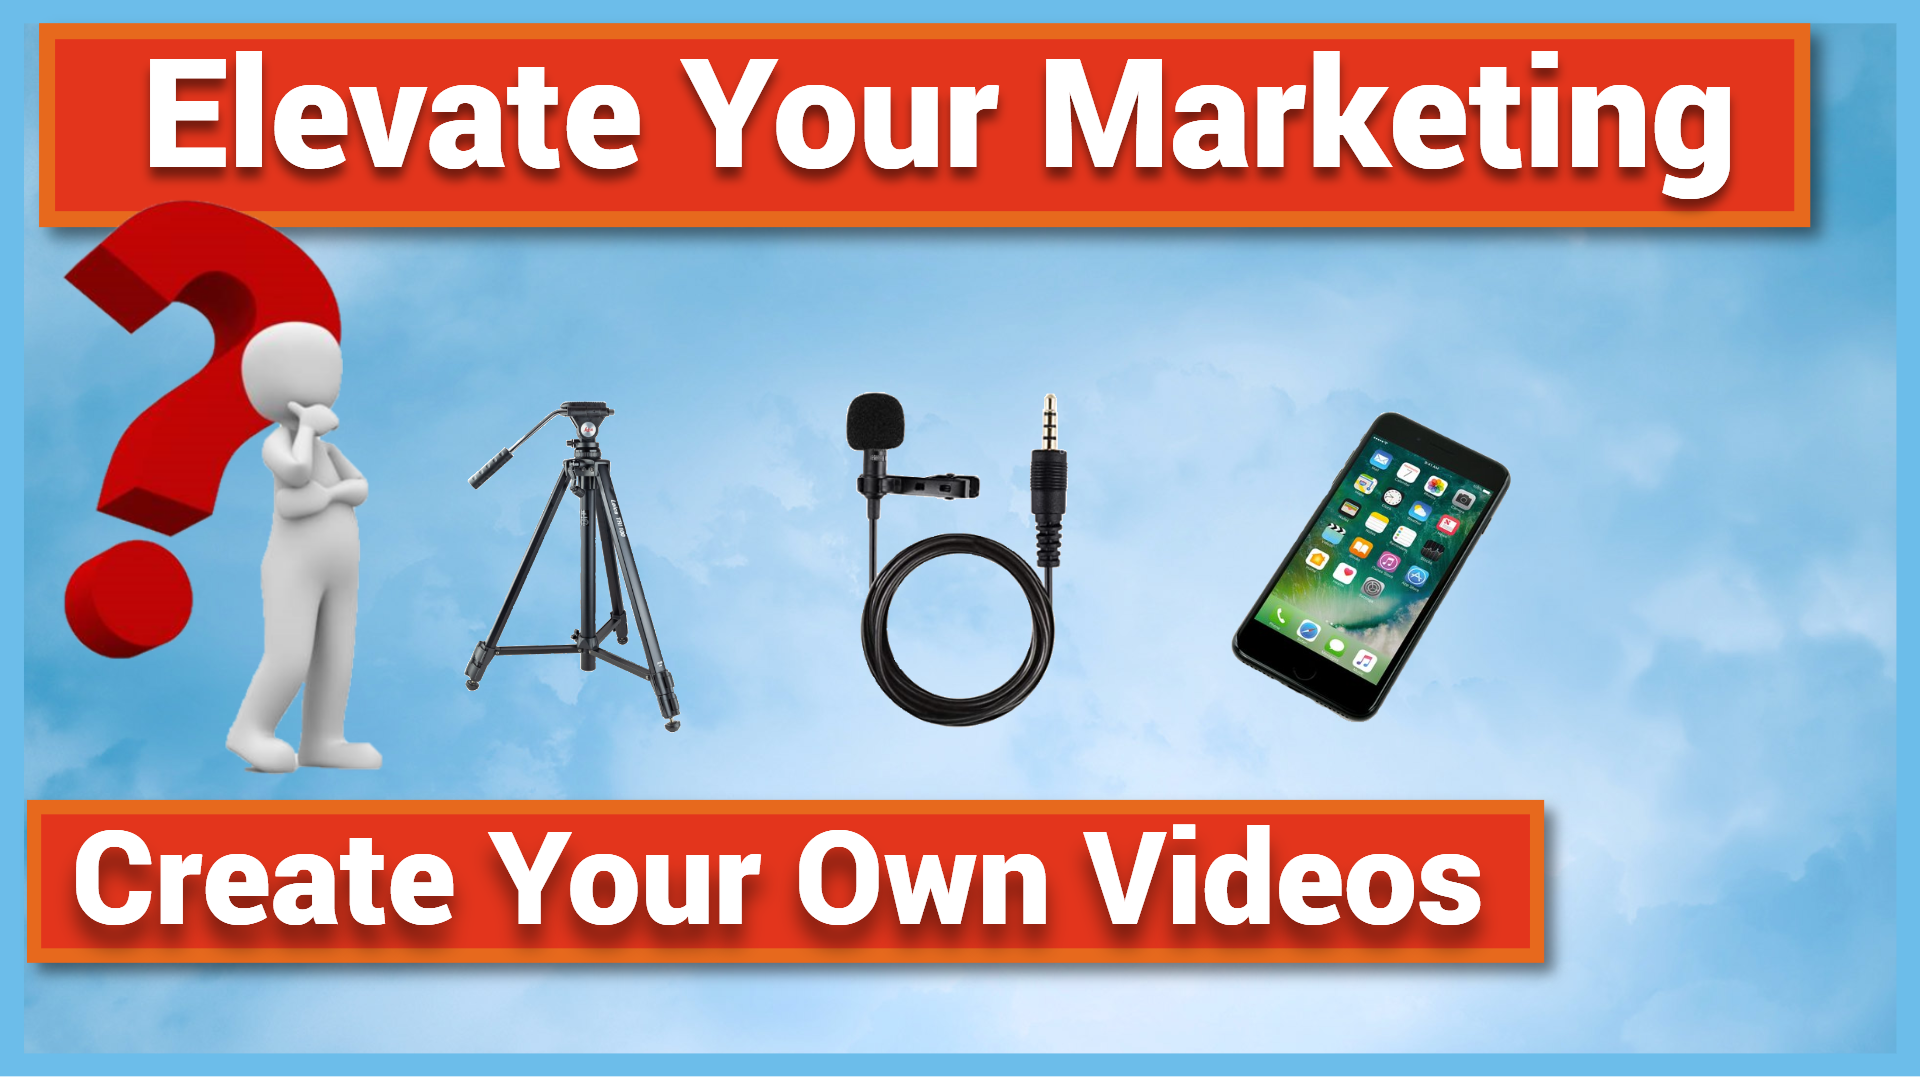 Creating Videos Using Your Mobile Phone